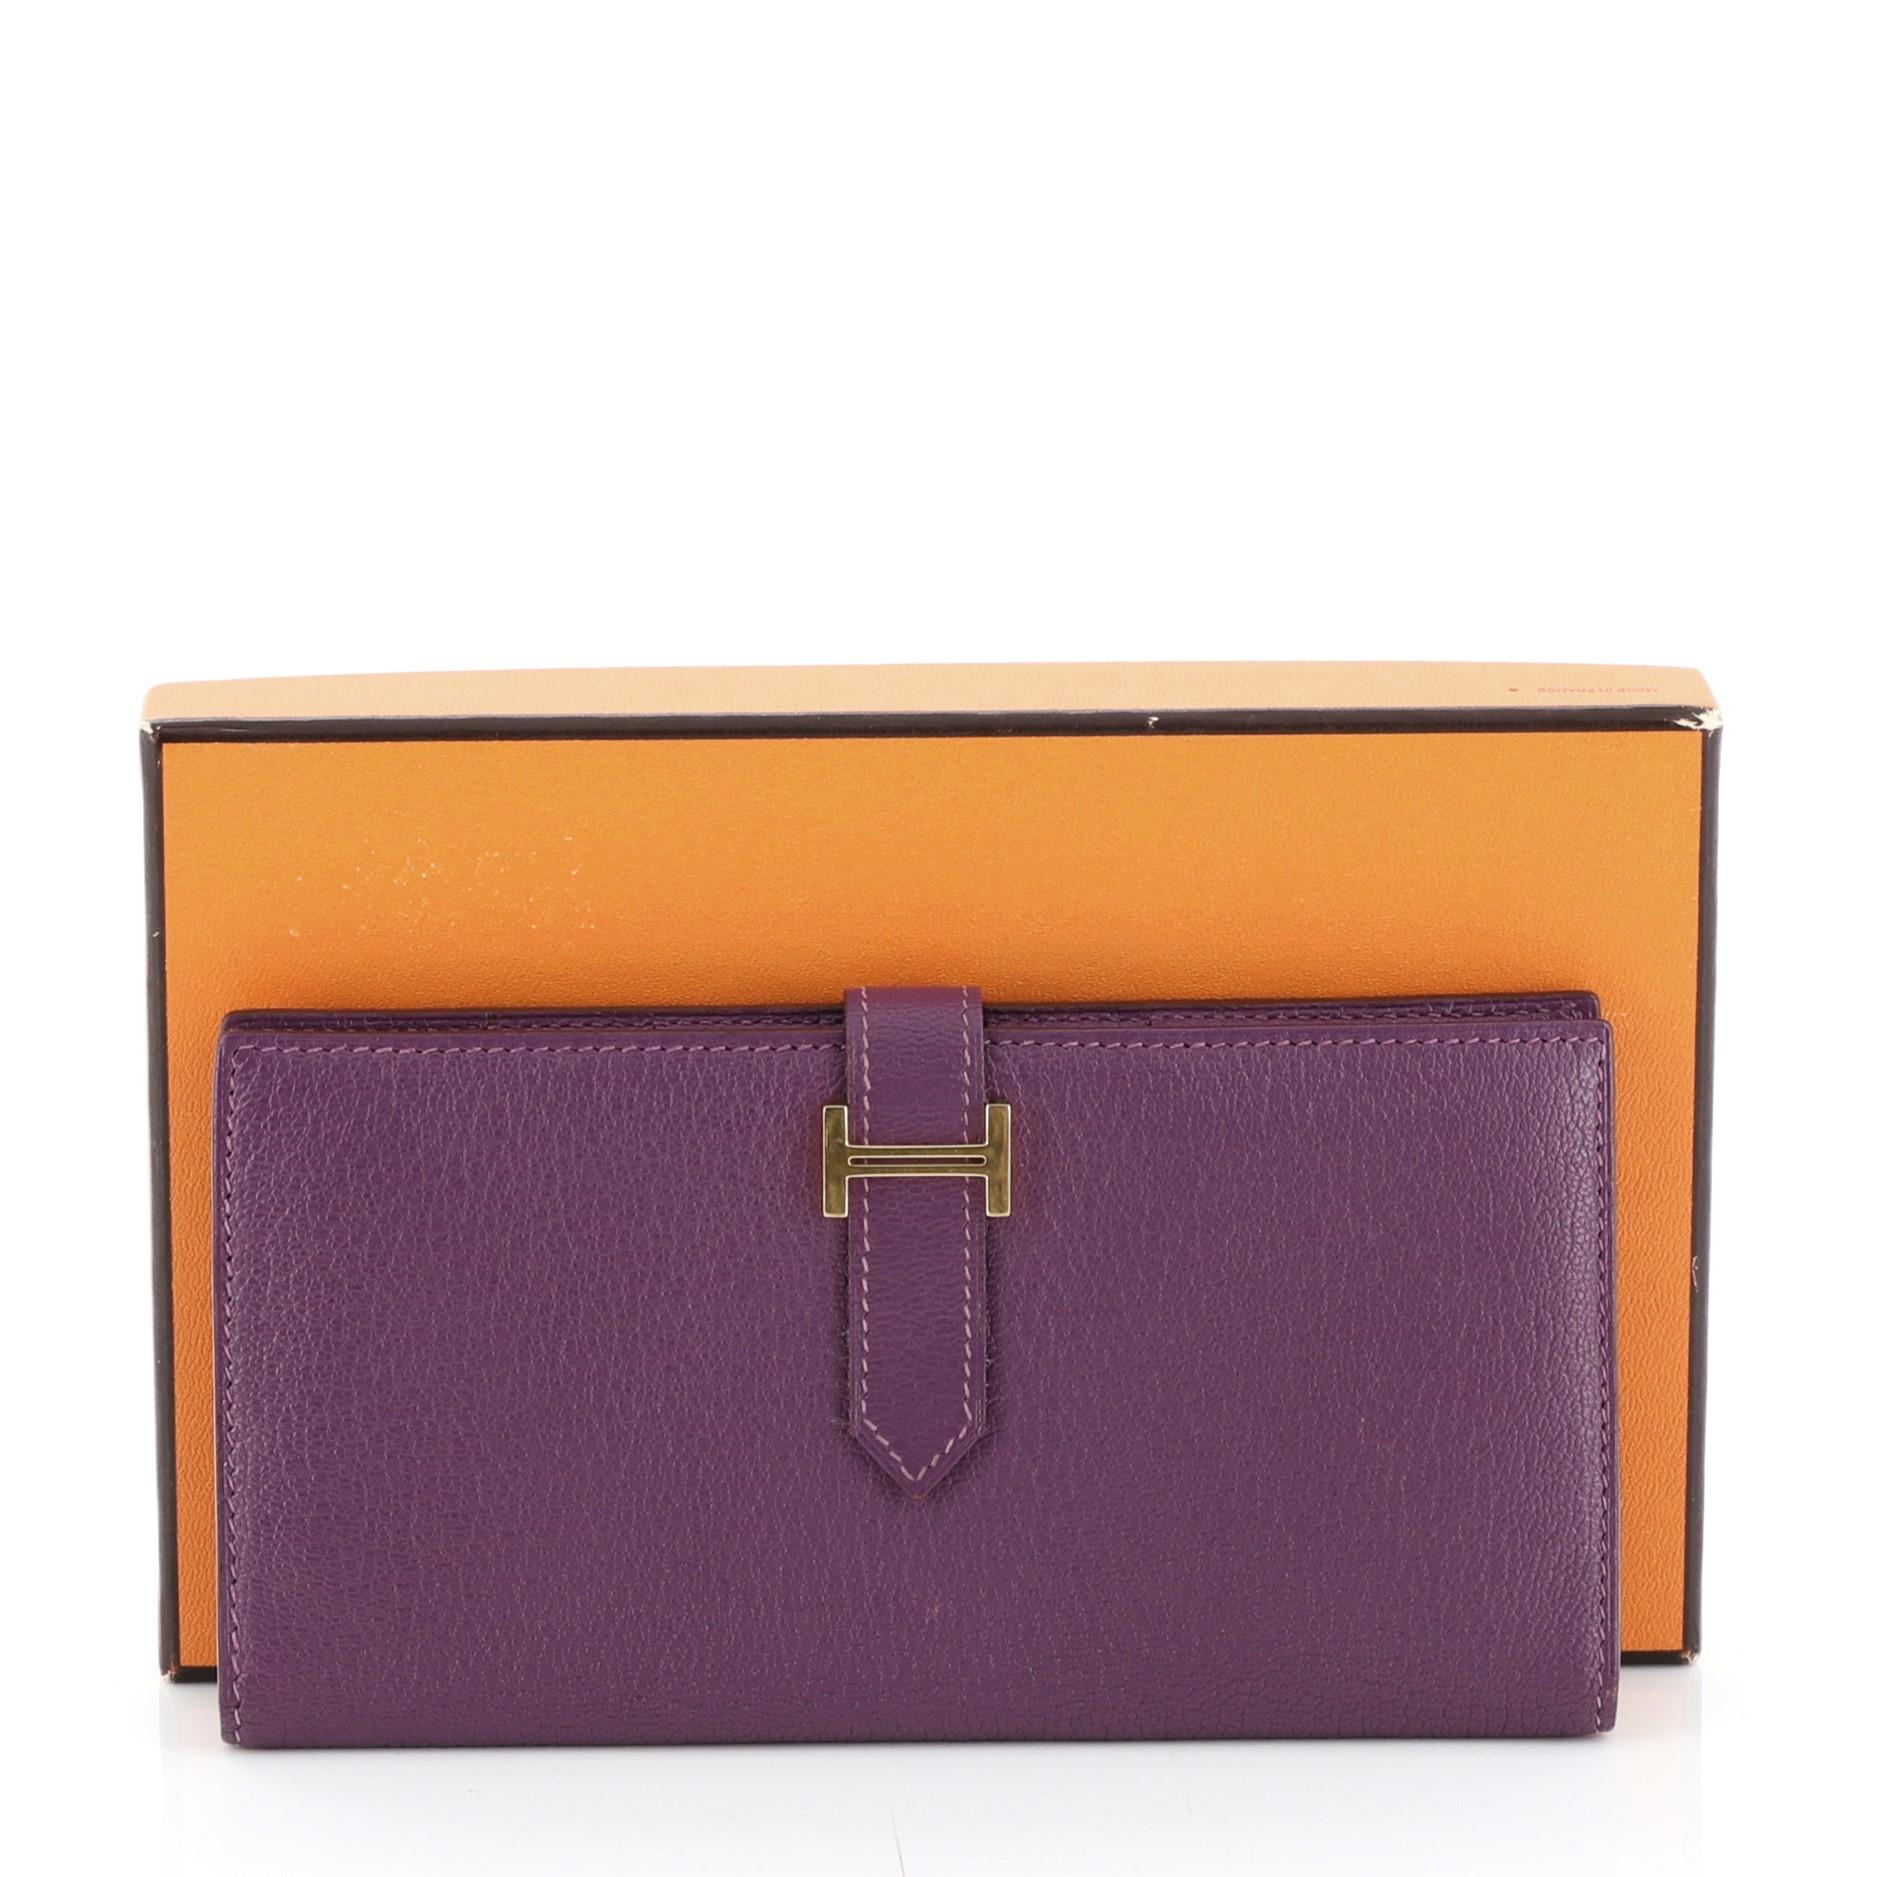 This Hermes Bearn Wallet Chevre Mysore Long, crafted from Parme purple Chevre Mysore leather, features an 'H' tab closure and palladium hardware. Its tab closure opens to a Parme purple Chevre leather interior with multiple card slots and zip